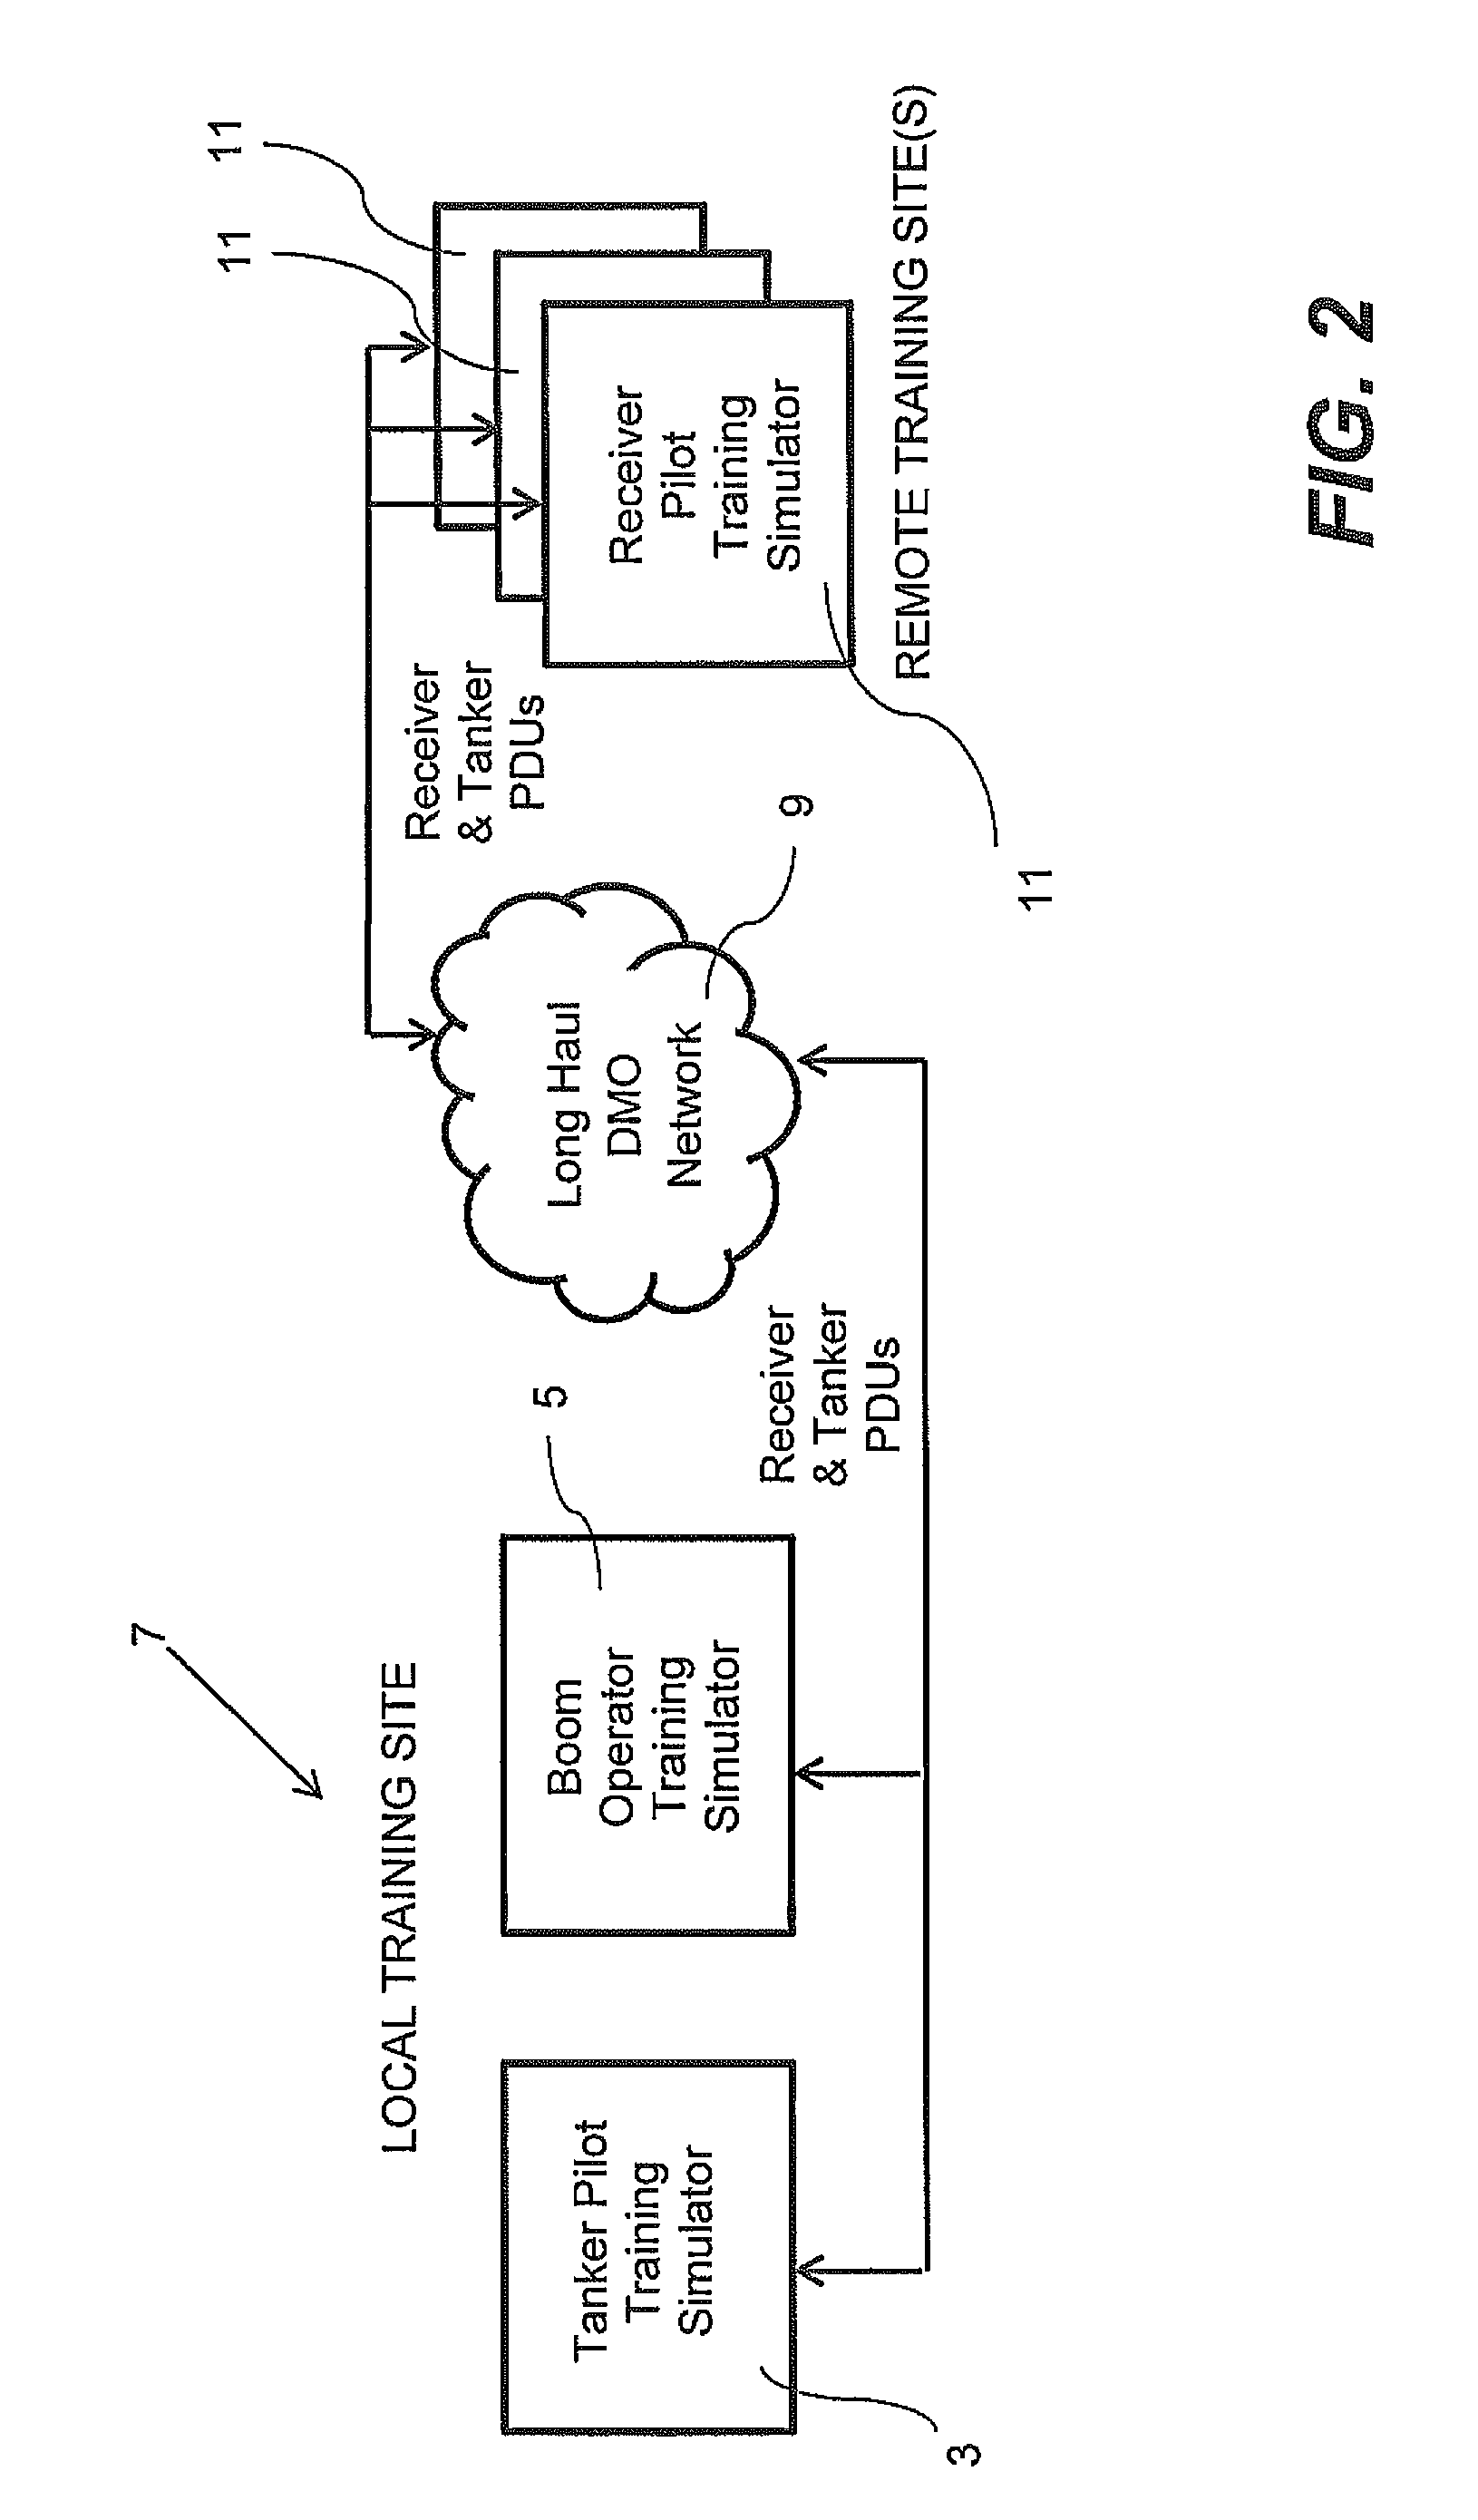 Geographically distributed simulation system, components and methods